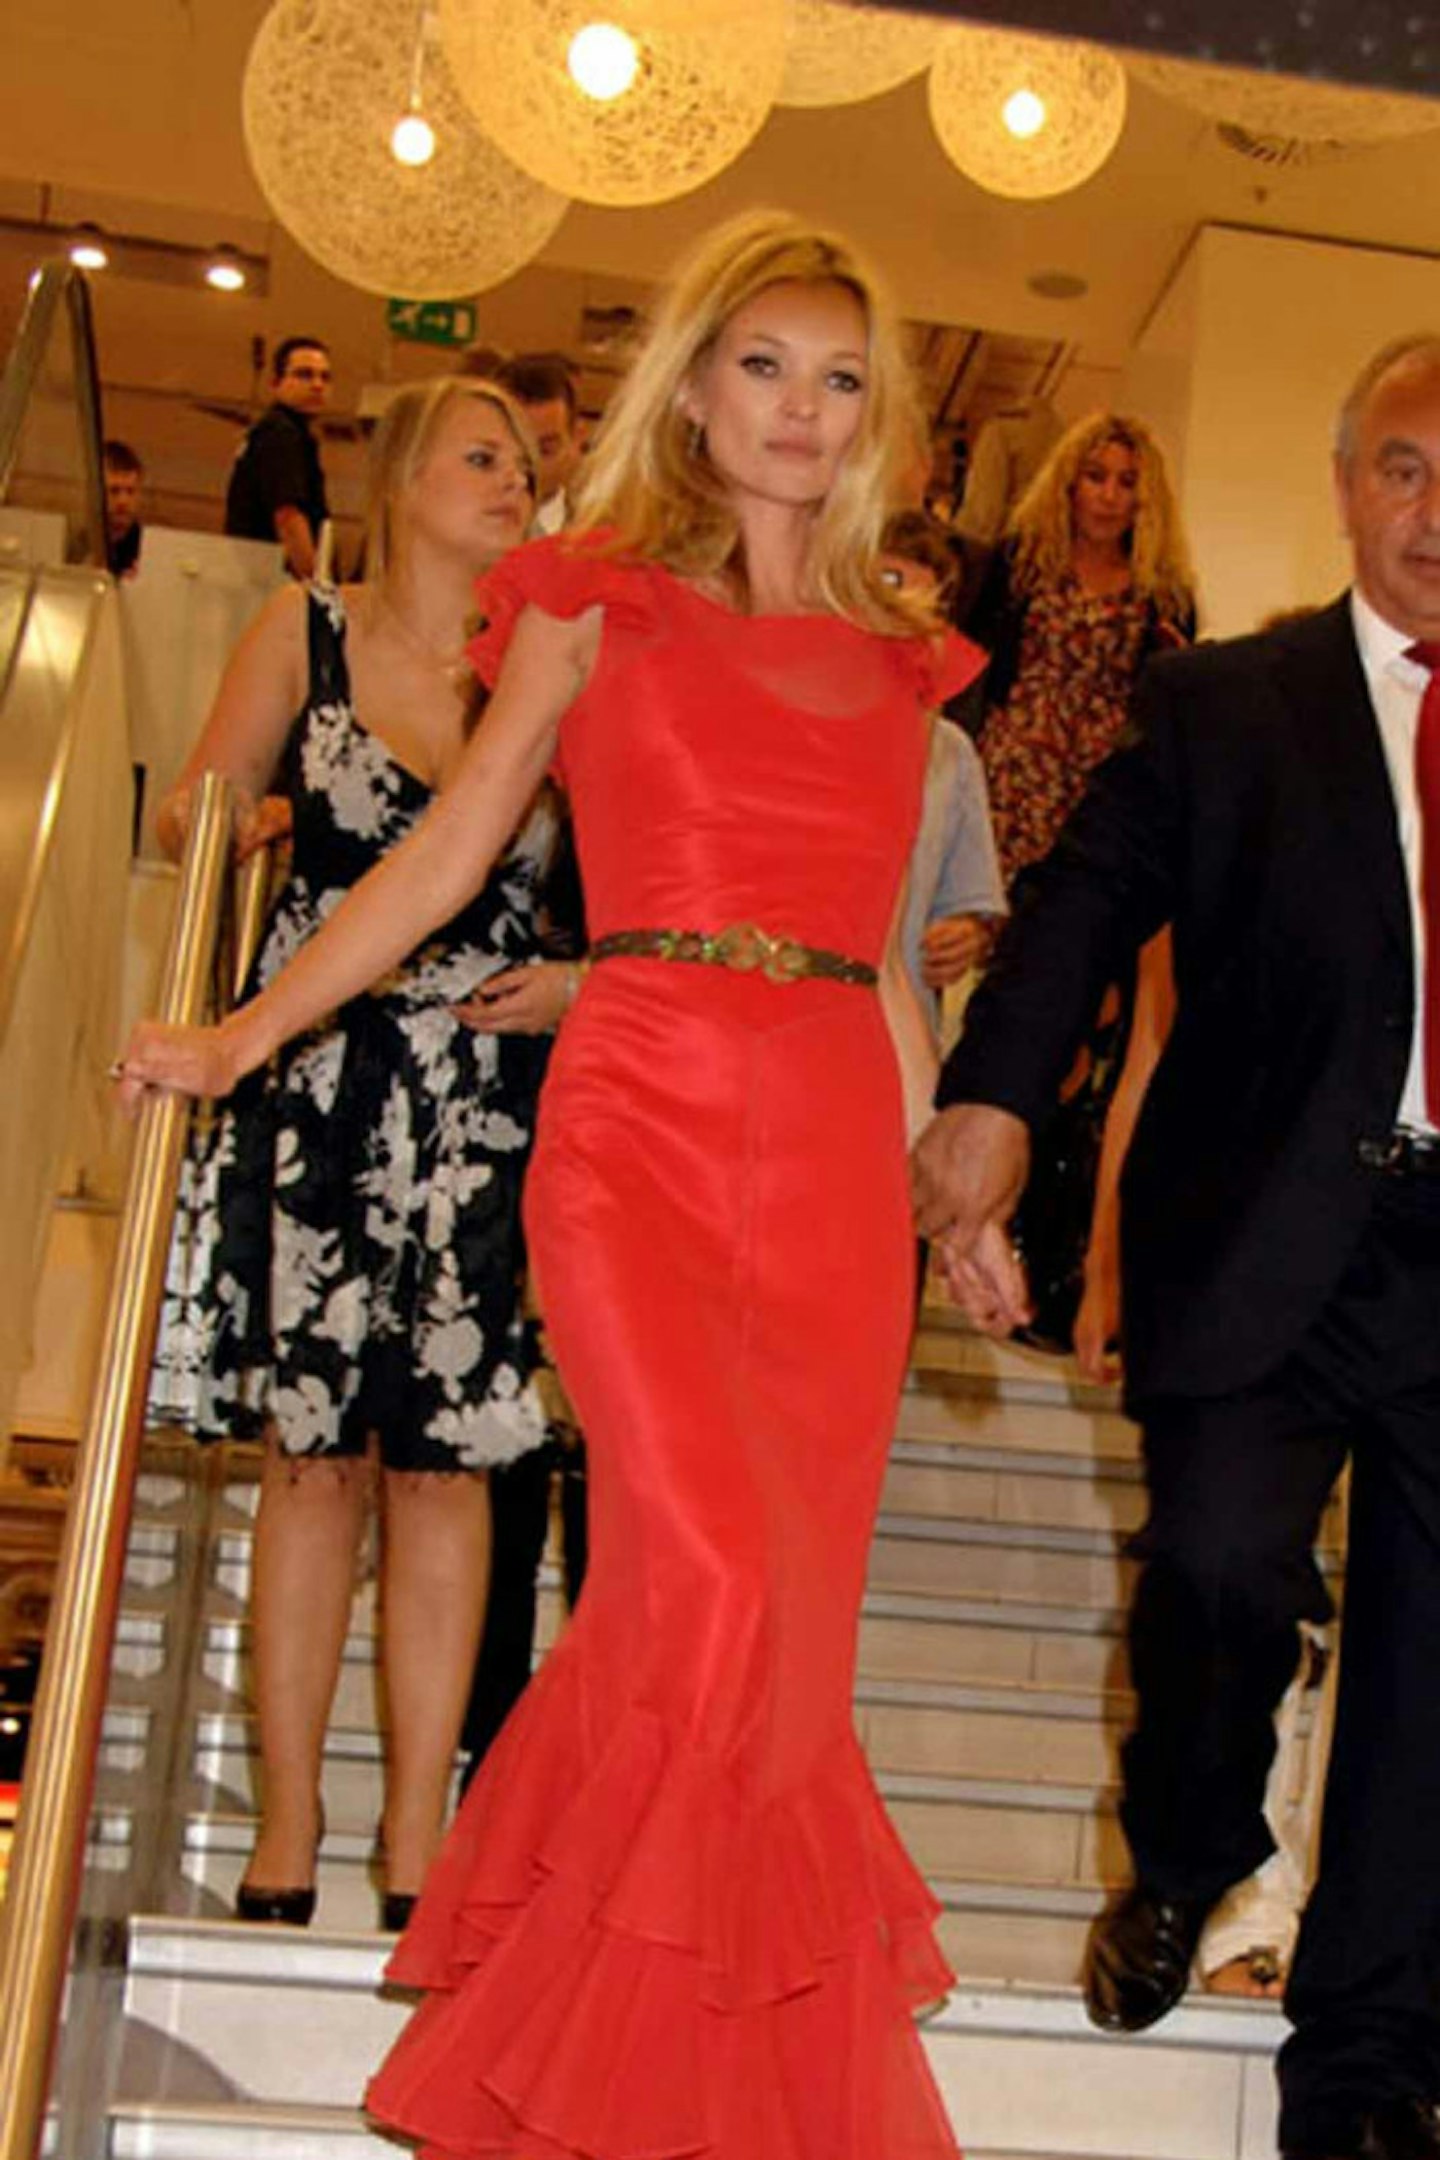 39Kate Moss style red dress topshop launch